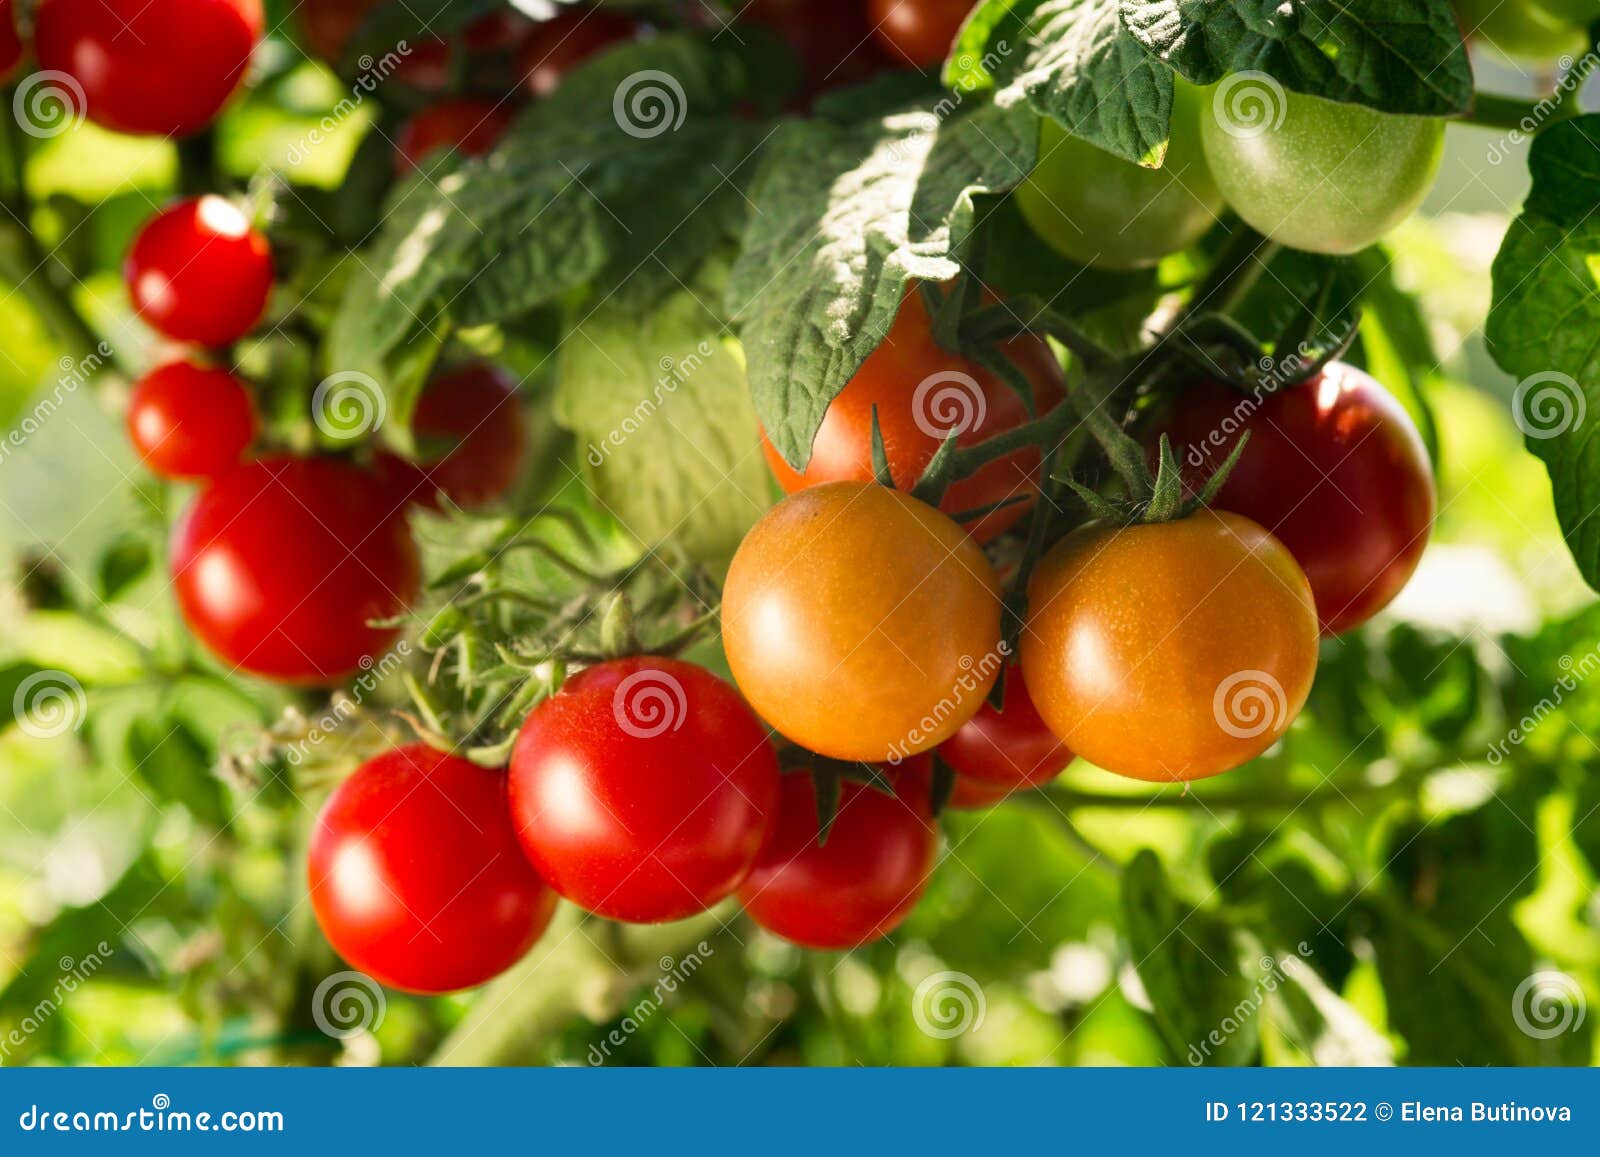 vegetable garden with plants of red tomatoes.